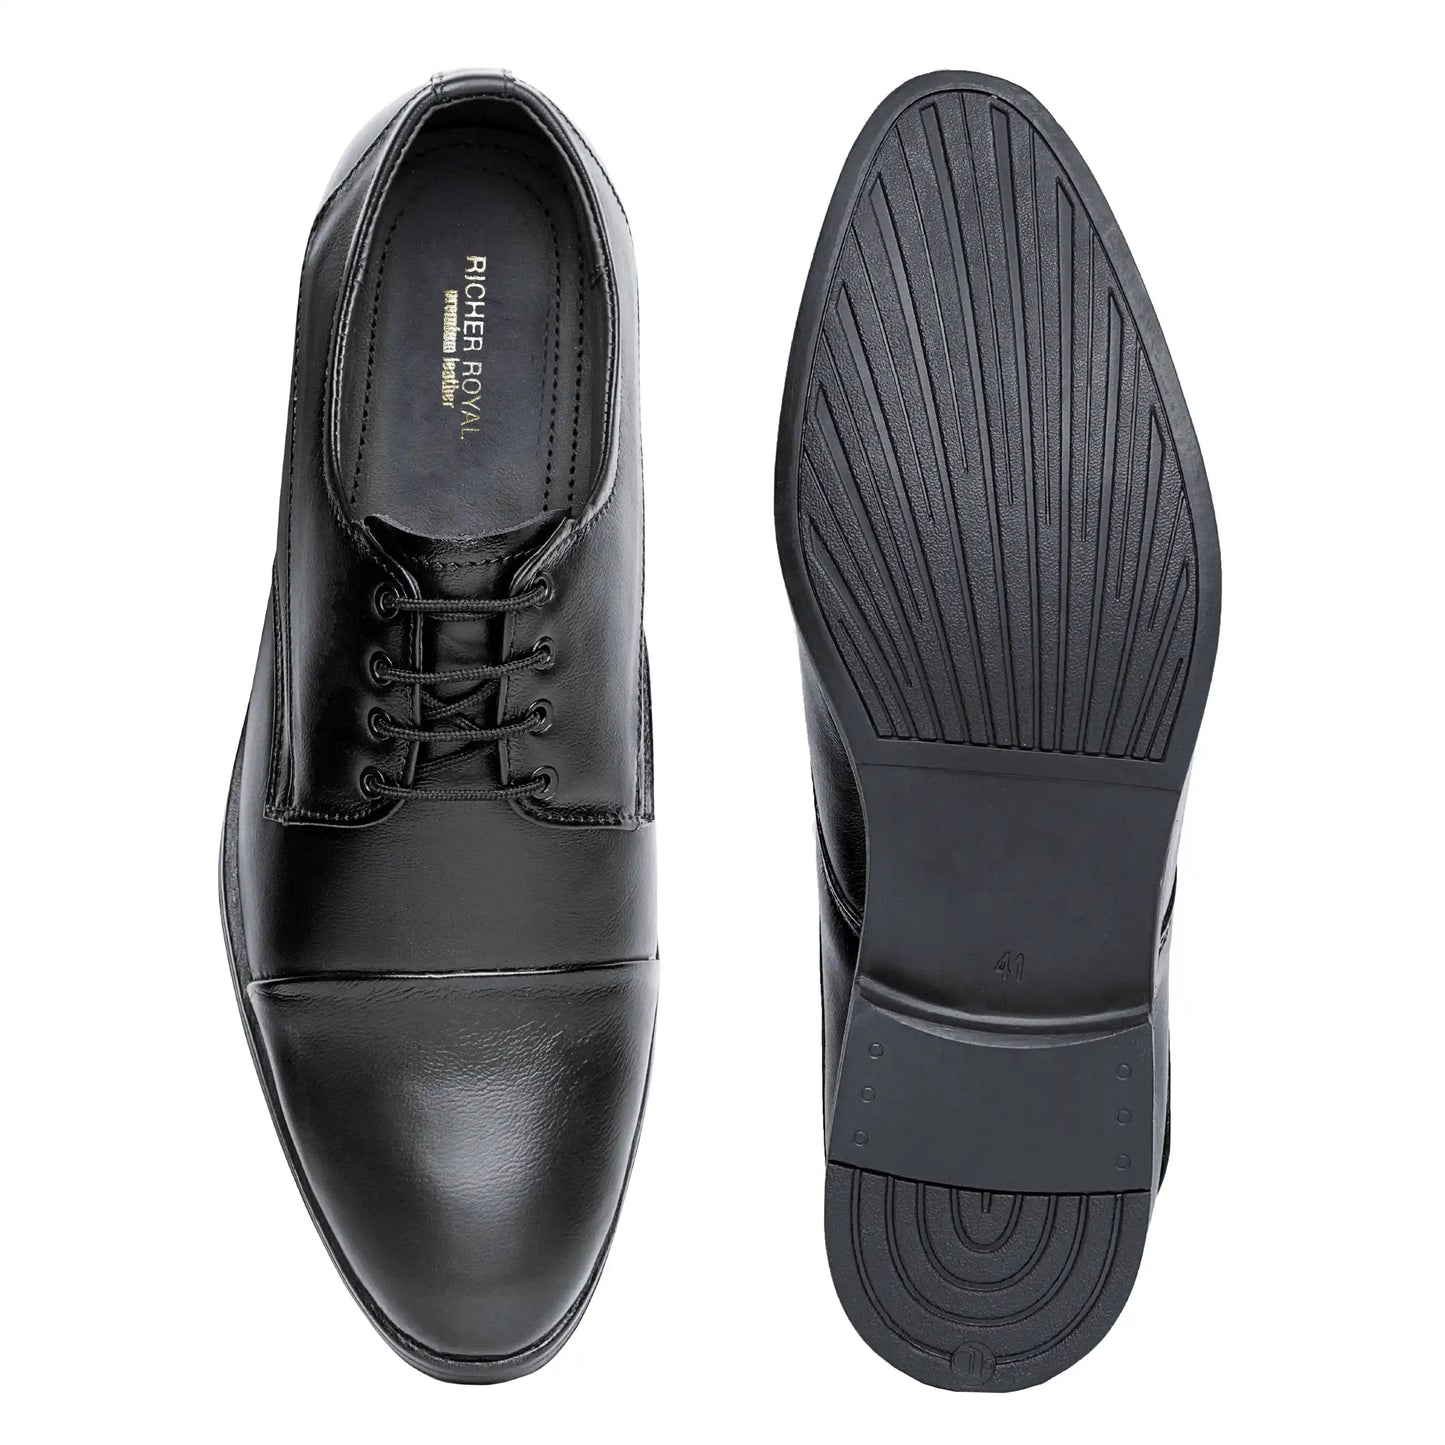 Genuine Leather Lace Up Formal Shoes for Men